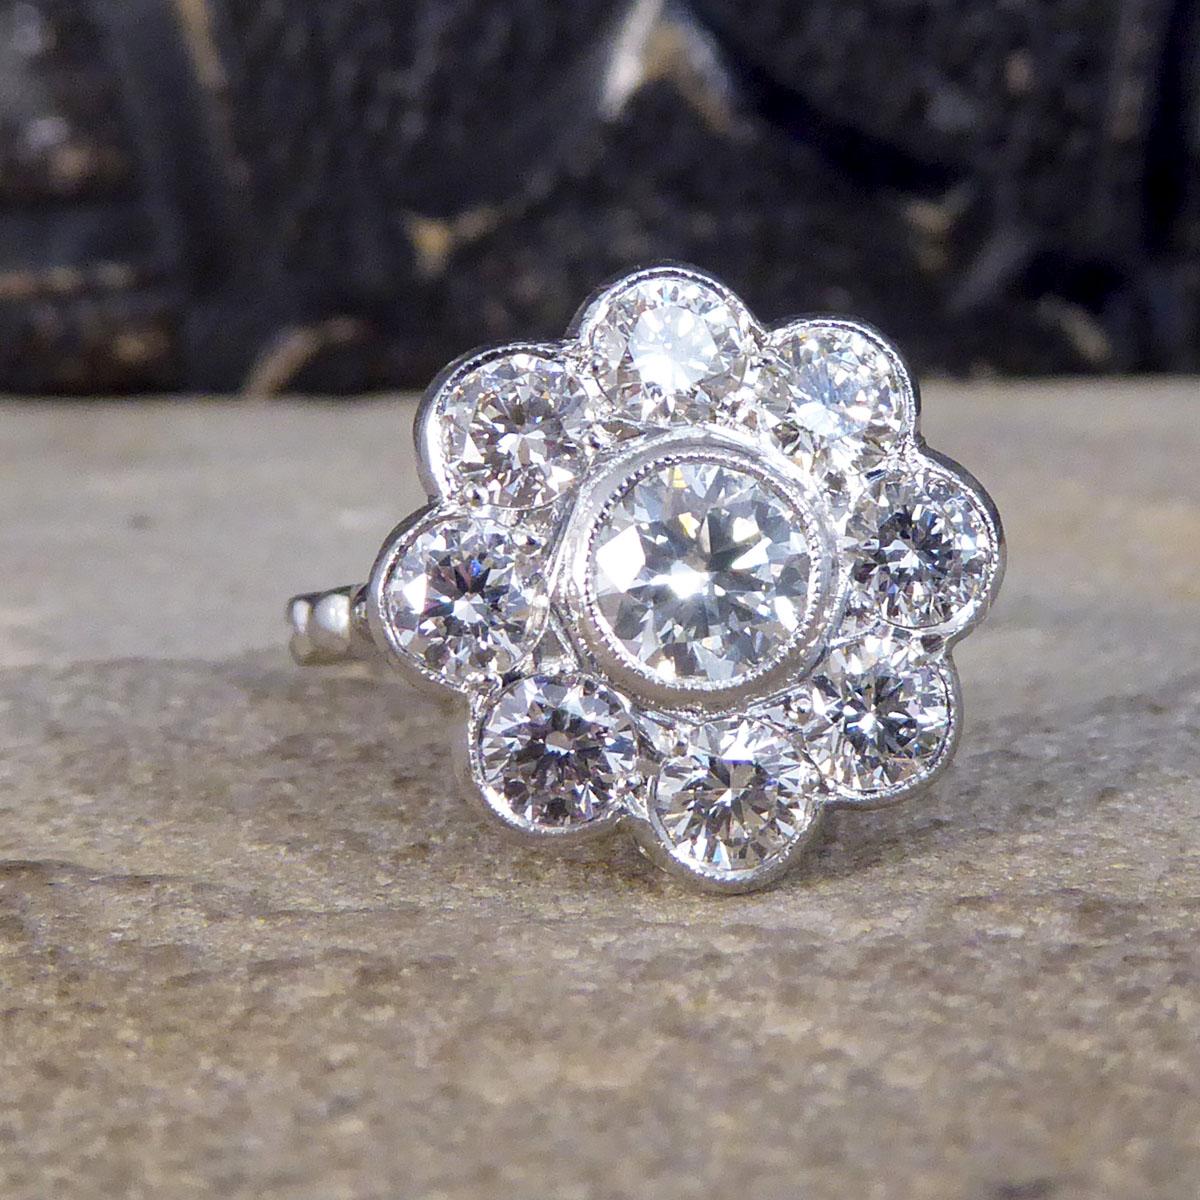 Such a stunning Daisy cluster ring set with Round Brilliant cut Diamonds giving it a total carat weight of 2.02ct with the centre being the largest with 8 surrounding stones. All set in Platinum with a milegrain edge, leading to a plain band and is